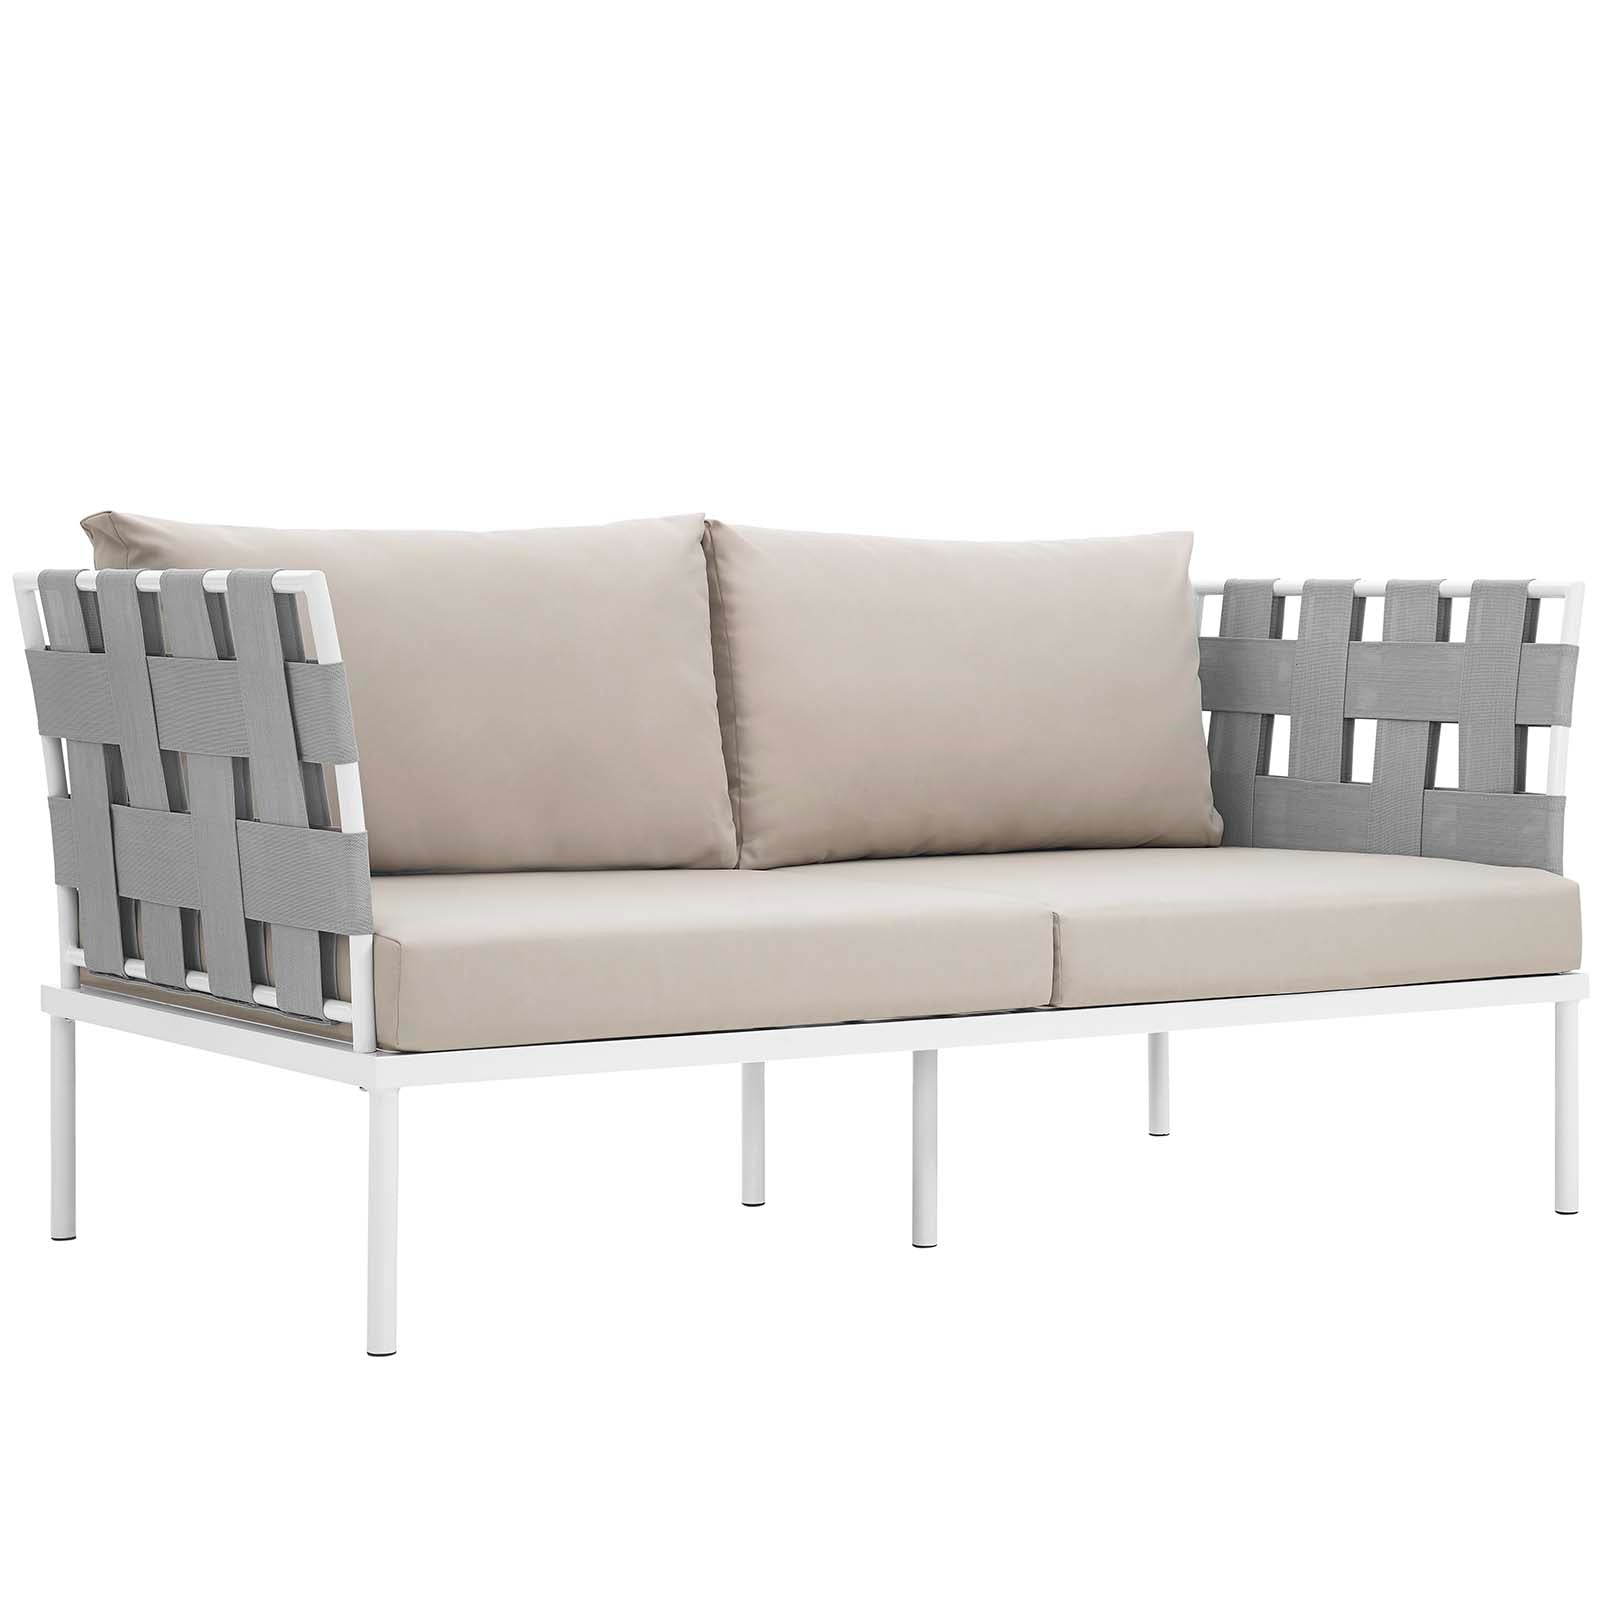 Modway Outdoor Conversation Sets - Harmony 5 Piece Outdoor 131"W Patio Aluminum Sectional Sofa Set Whit